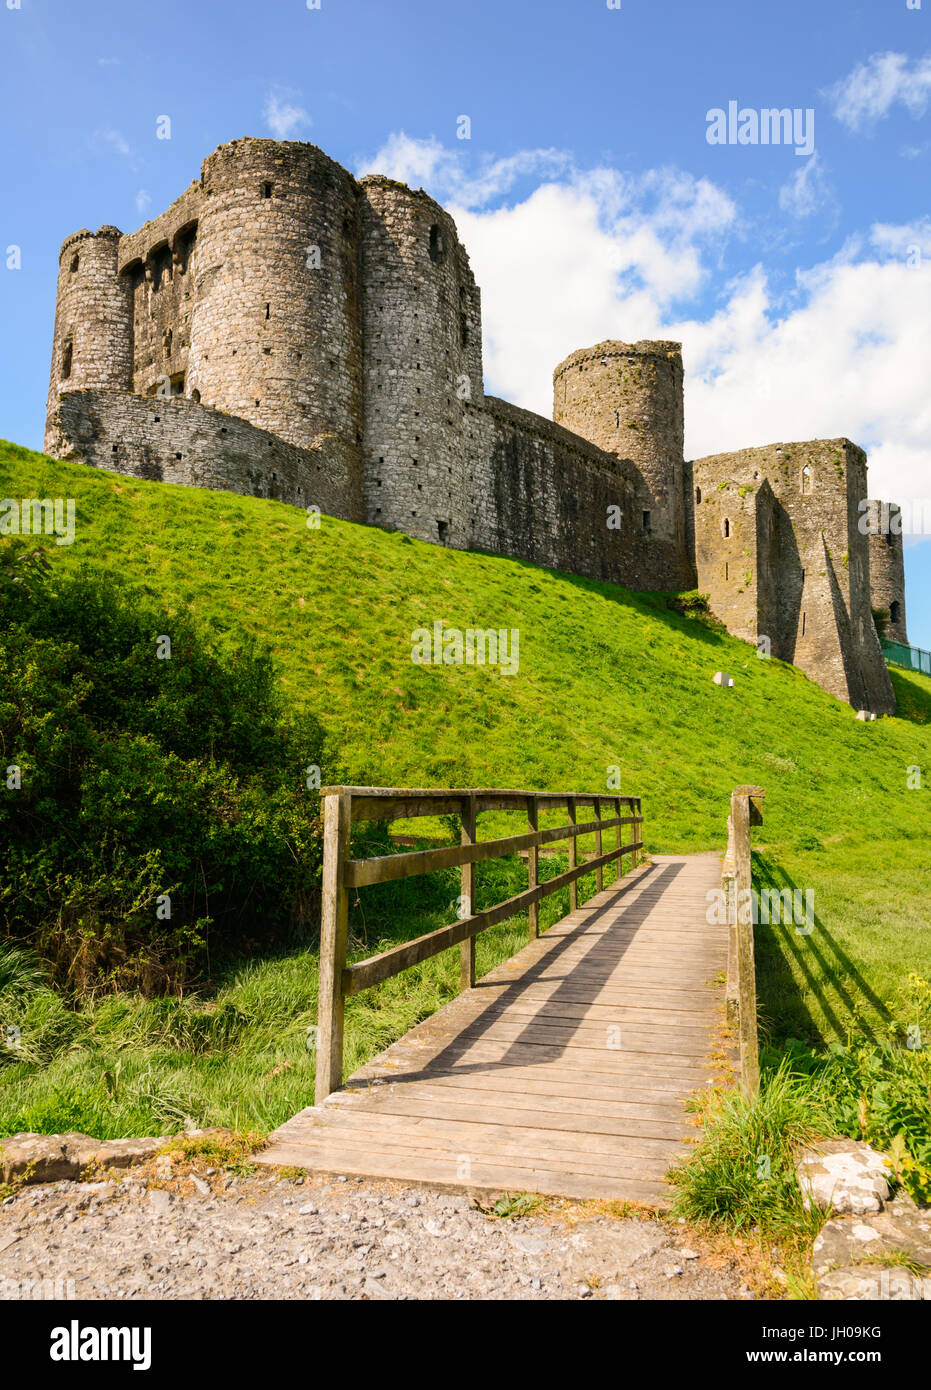 Kidwelly Castle close to the River Gwendraeth. Kidwelly (Cydweli), Carmarthenshire. Wales. Stock Photo